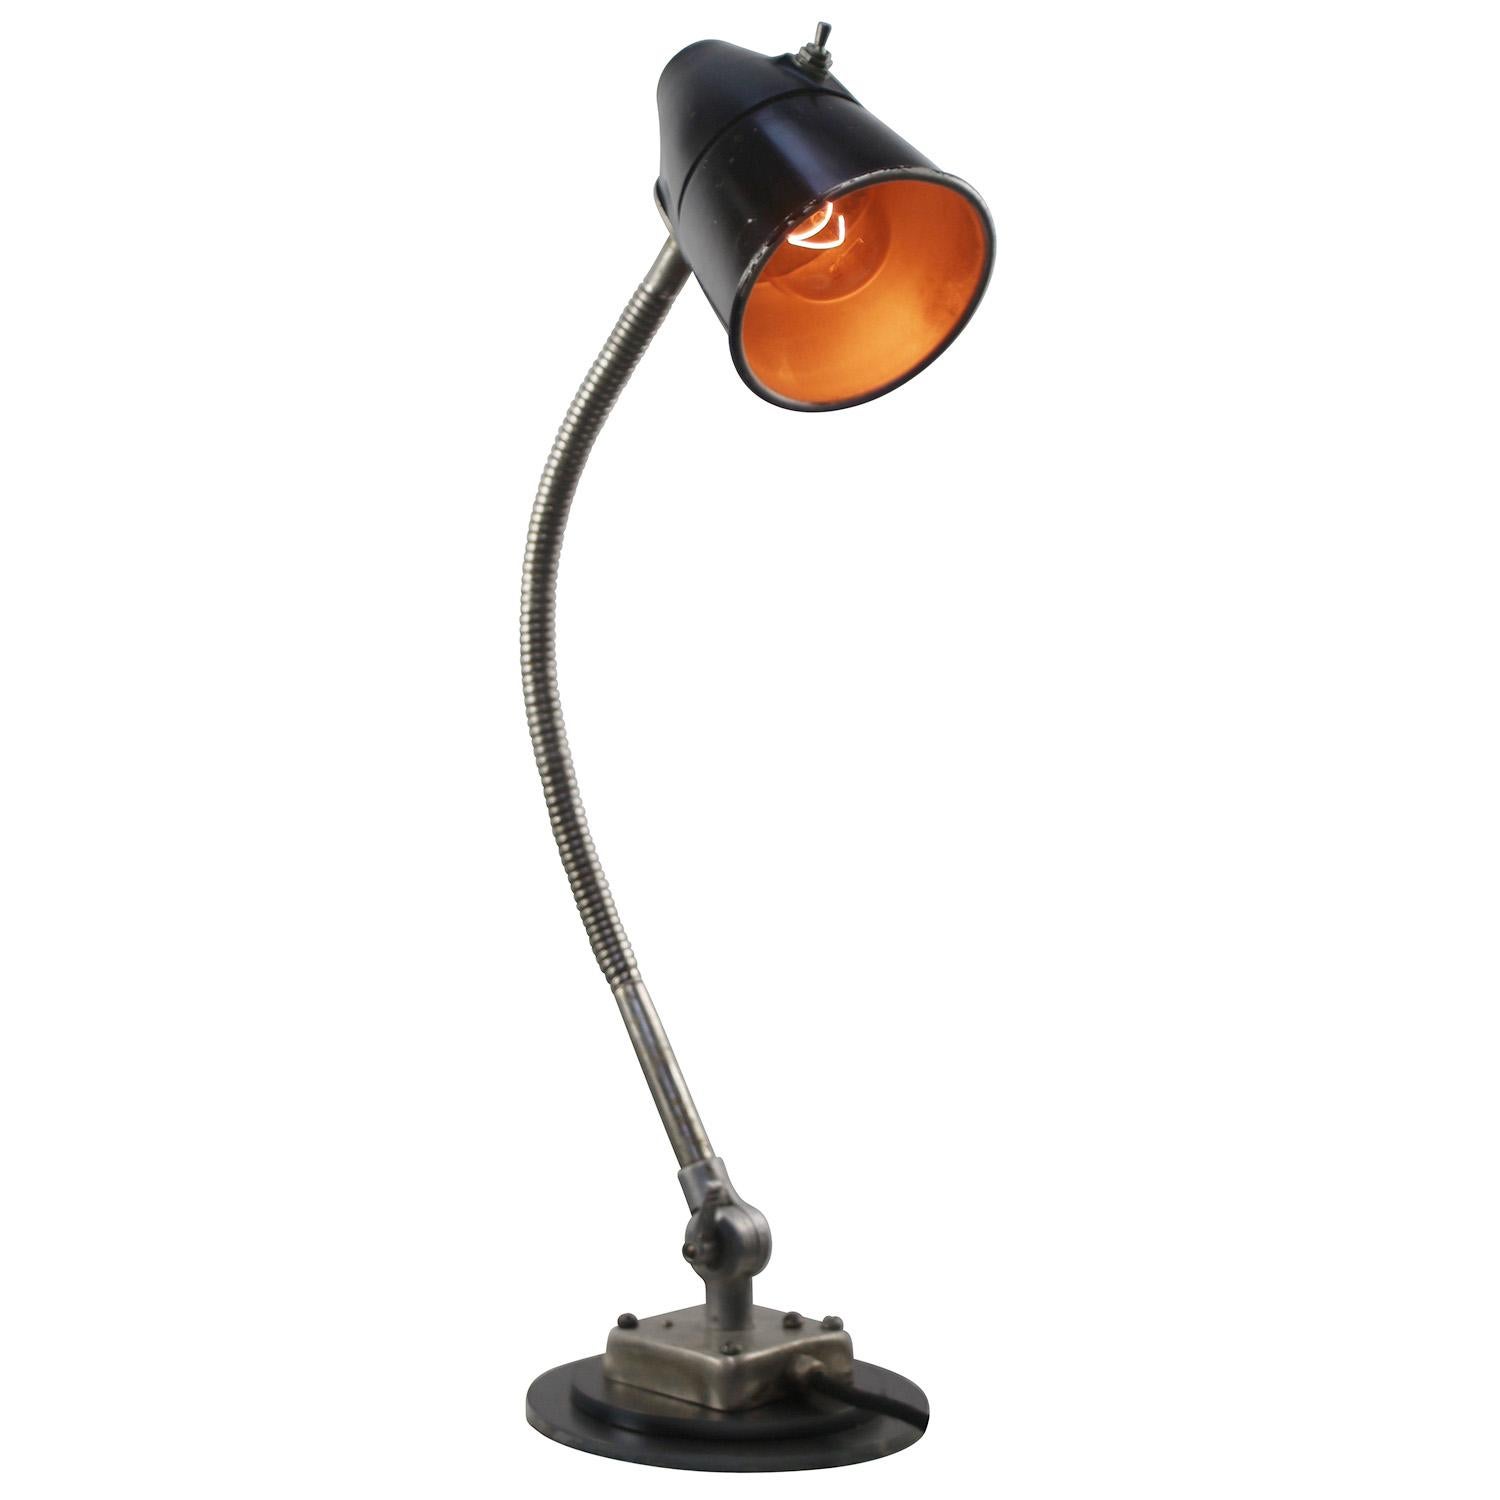 Metal work light / table desk lamp with gooseneck arm
Black metal shade with Bakelite top
Switch in shade

Available with UK / US plug

weight 4.00 kg / 8.8 lb

Priced per individual item. All lamps have been made suitable by international standards